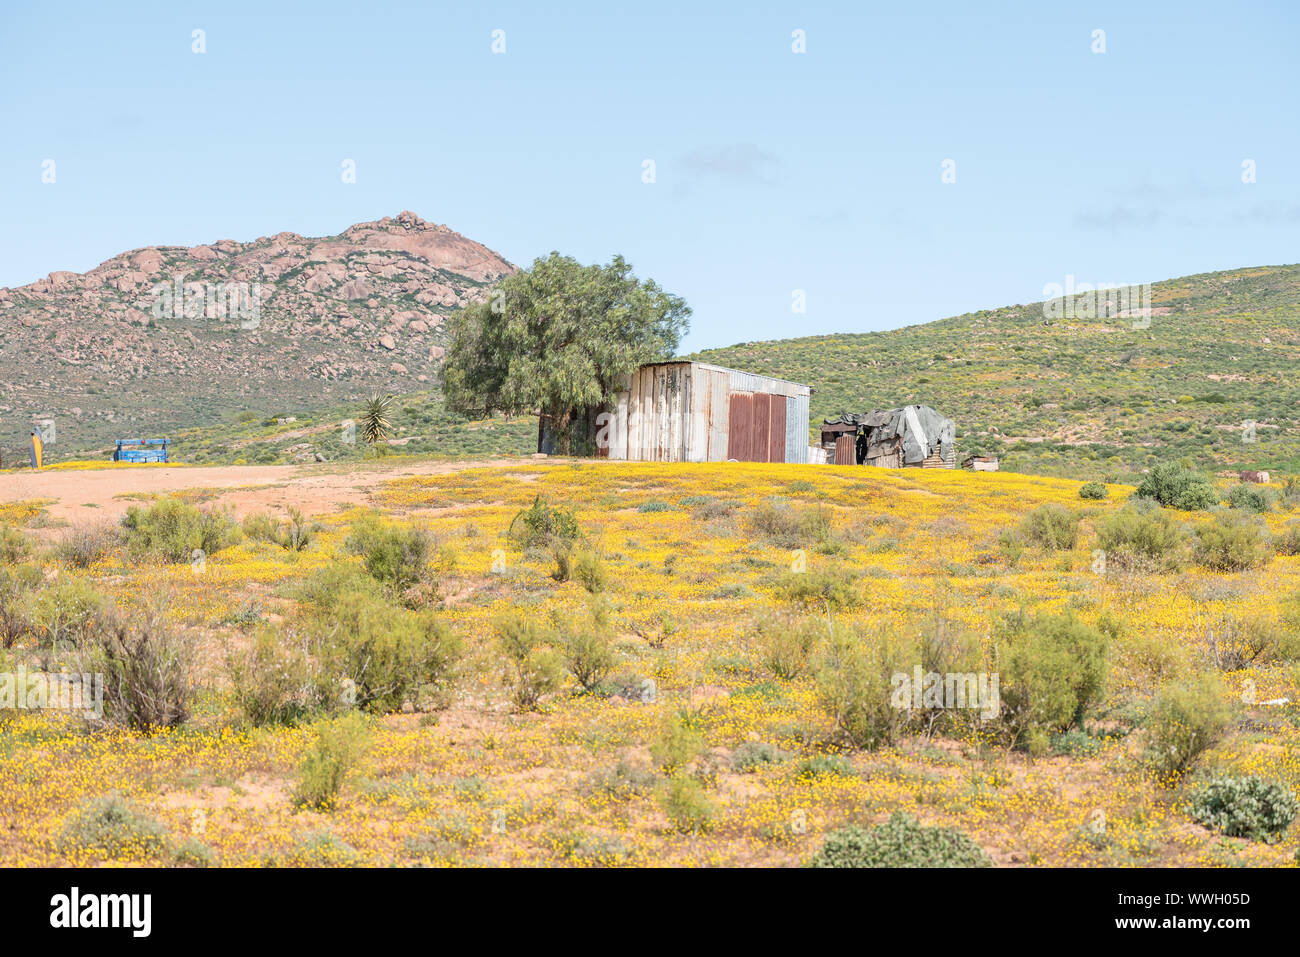 A Nama farm near Spoegrivier (spit river) in the Northern Cape Namaqualand region of South Africa Stock Photo